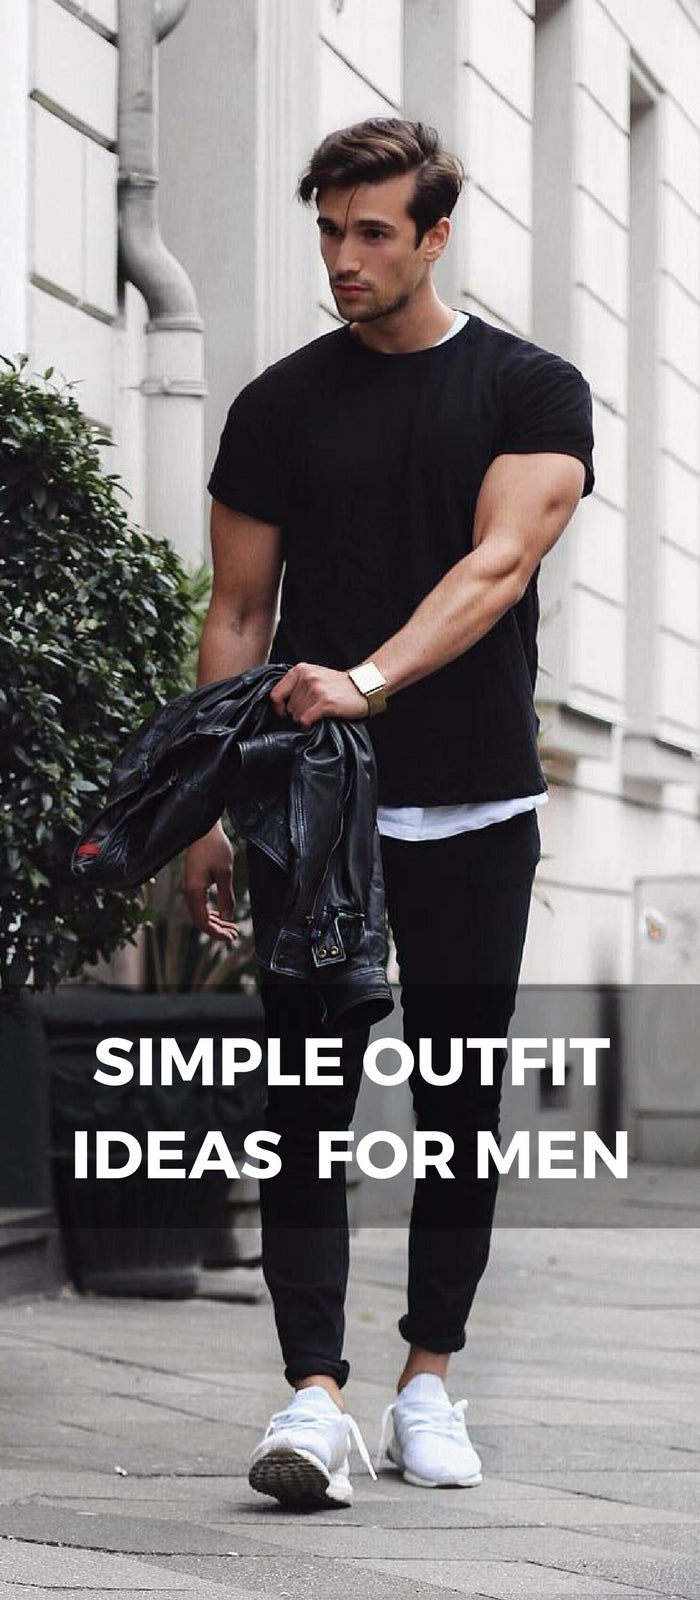 10 Everyday Outfit Ideas To Help You Look Amazing - LIFESTYLE BY PS